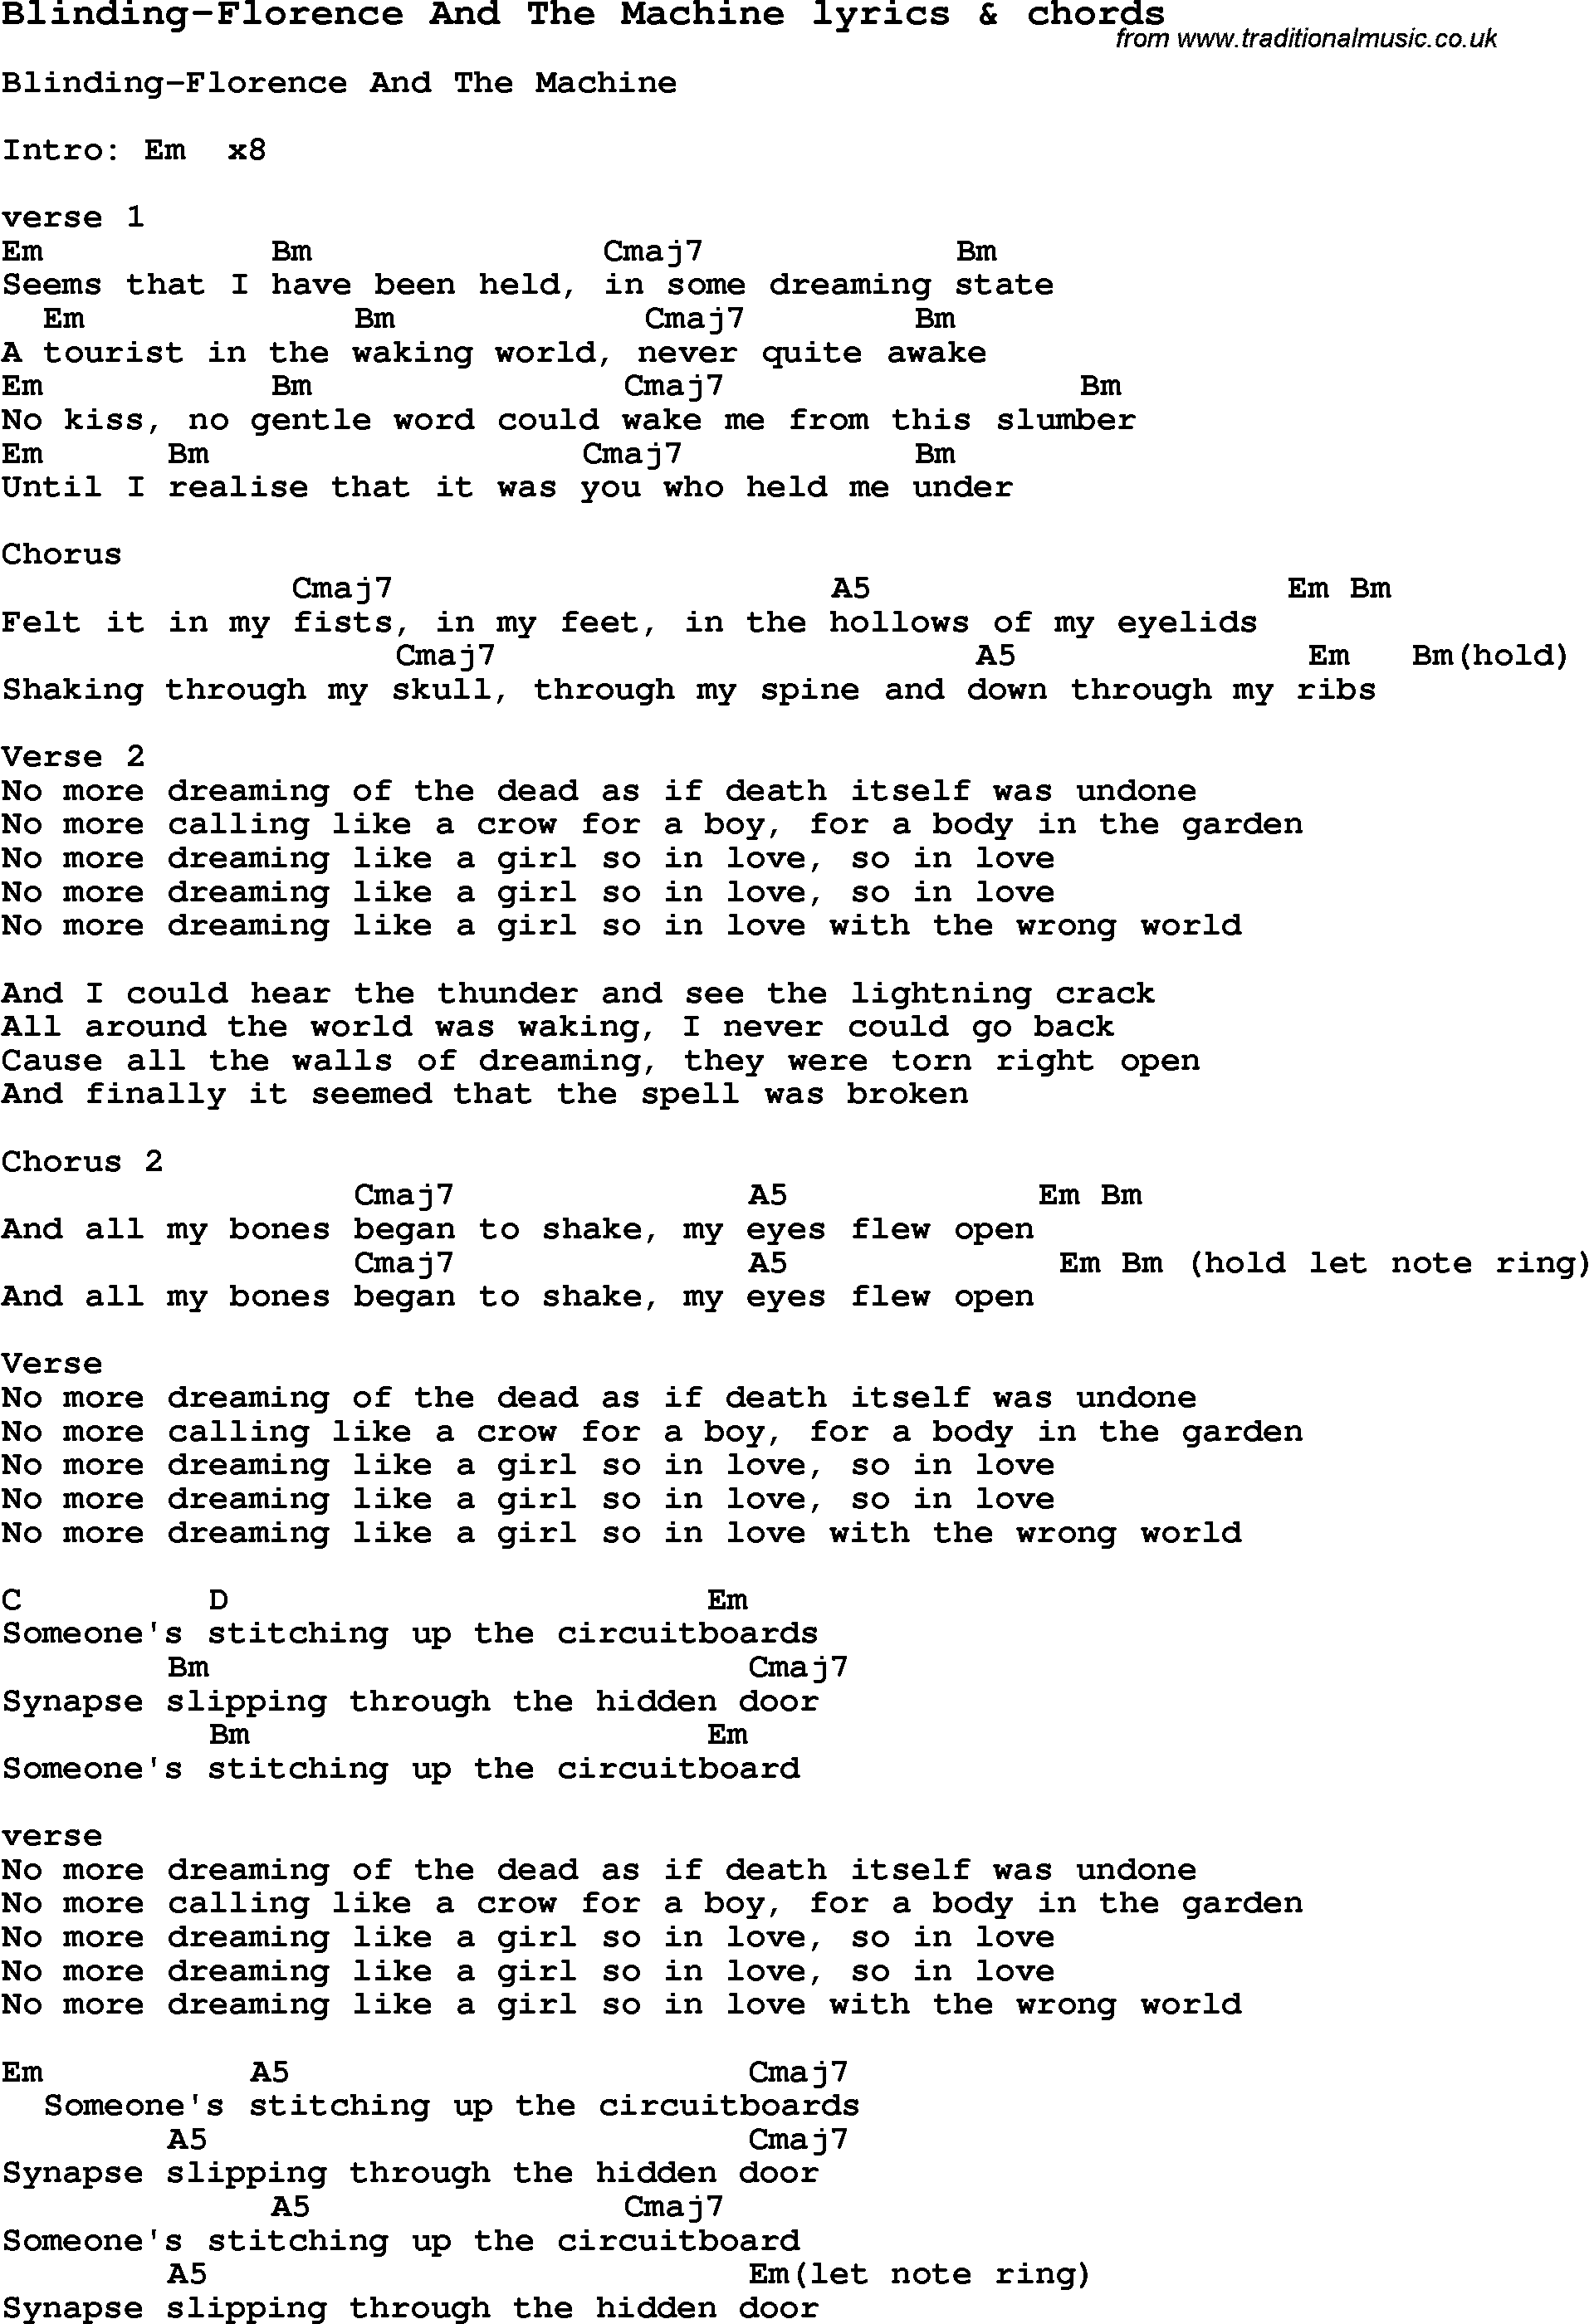 Love Song Lyrics for: Blinding-Florence And The Machine with chords for Ukulele, Guitar Banjo etc.